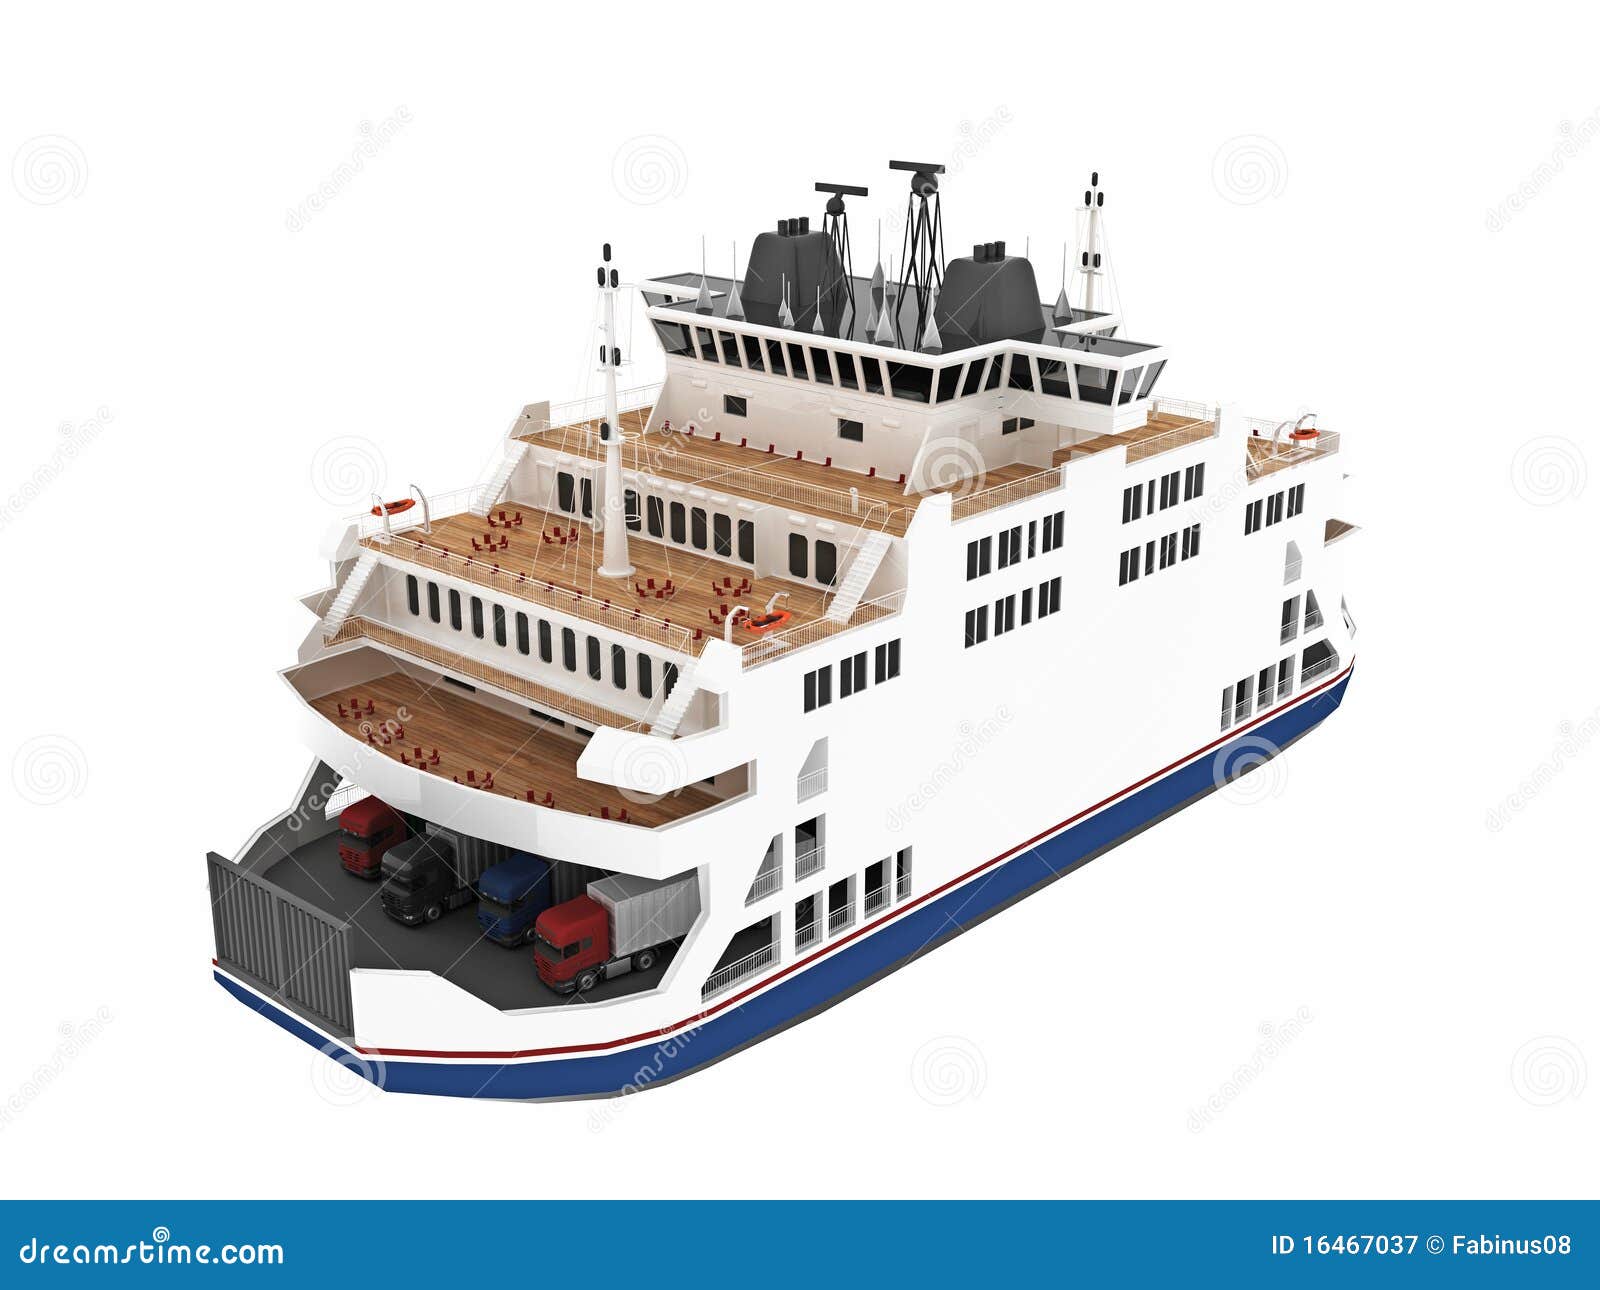 Toy Ferry Boat Royalty Free Stock Photography - Image ...